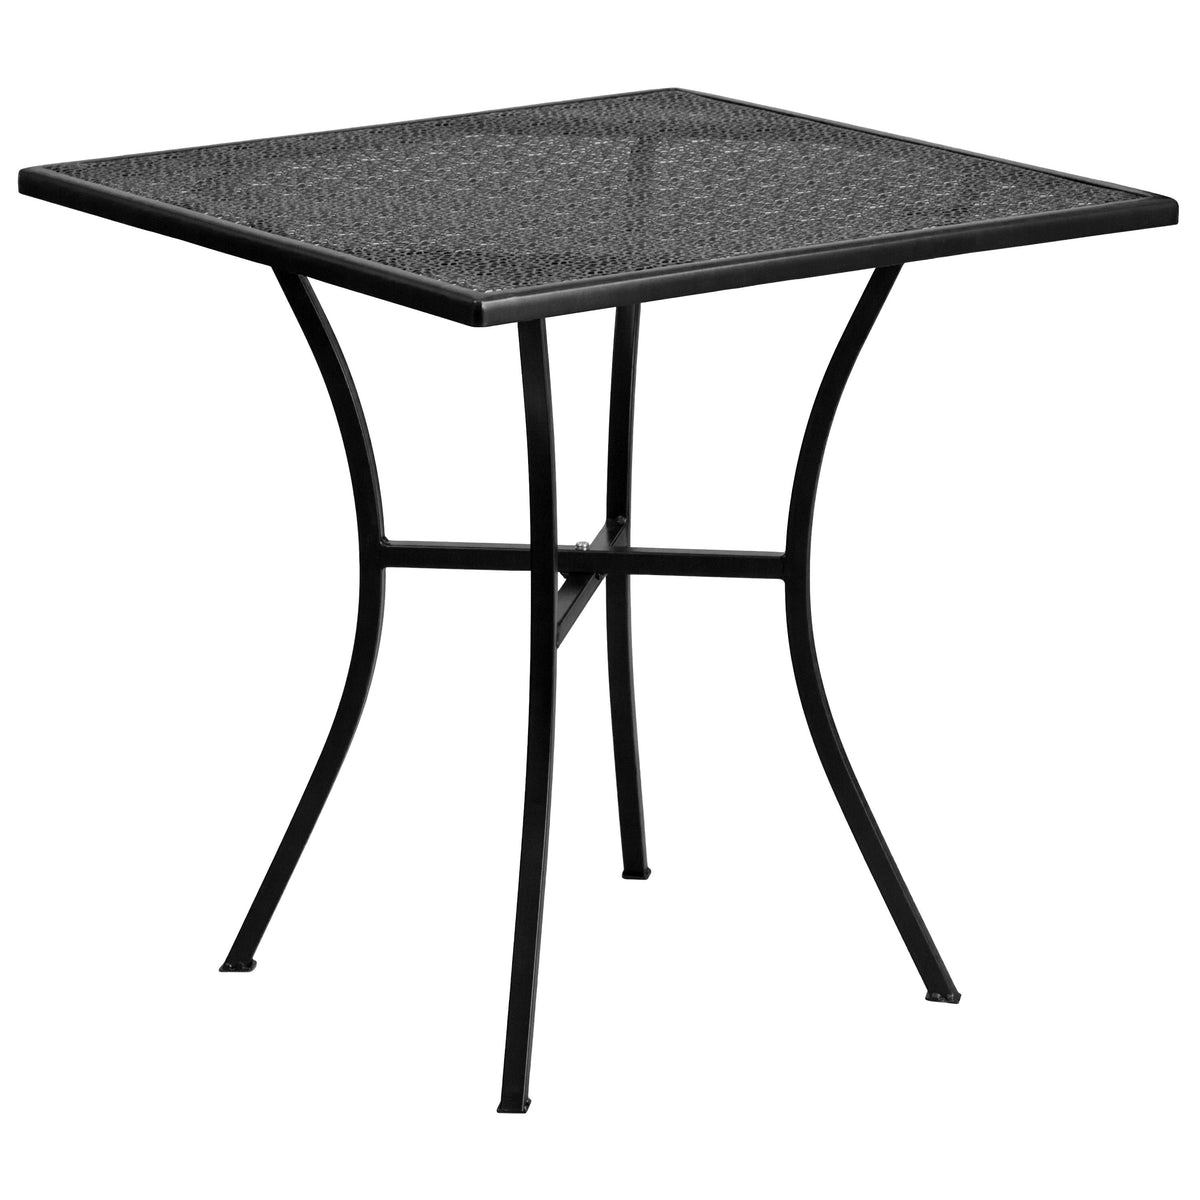 Black |#| 28inch Square Black Indoor-Outdoor Steel Patio Table Set with 4 Round Back Chairs